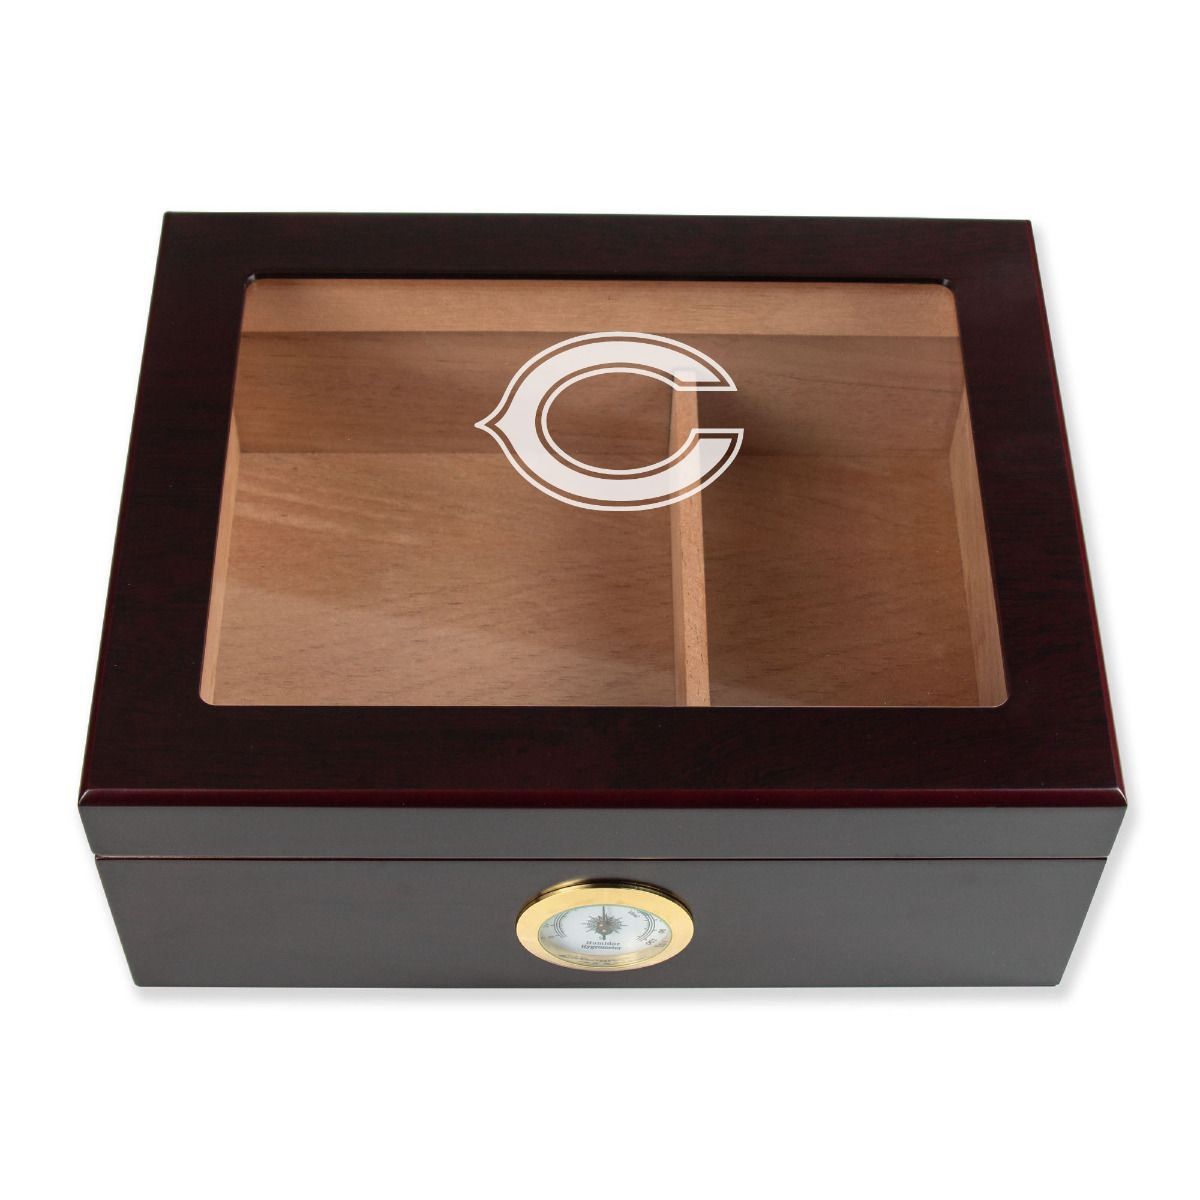 Personalized Cigar Humidor - Chicago Bears Football Sports Team Logo Design  - Promotional Products - Custom Gifts - Party Favors - Corporate Gifts -  Personalized Gifts